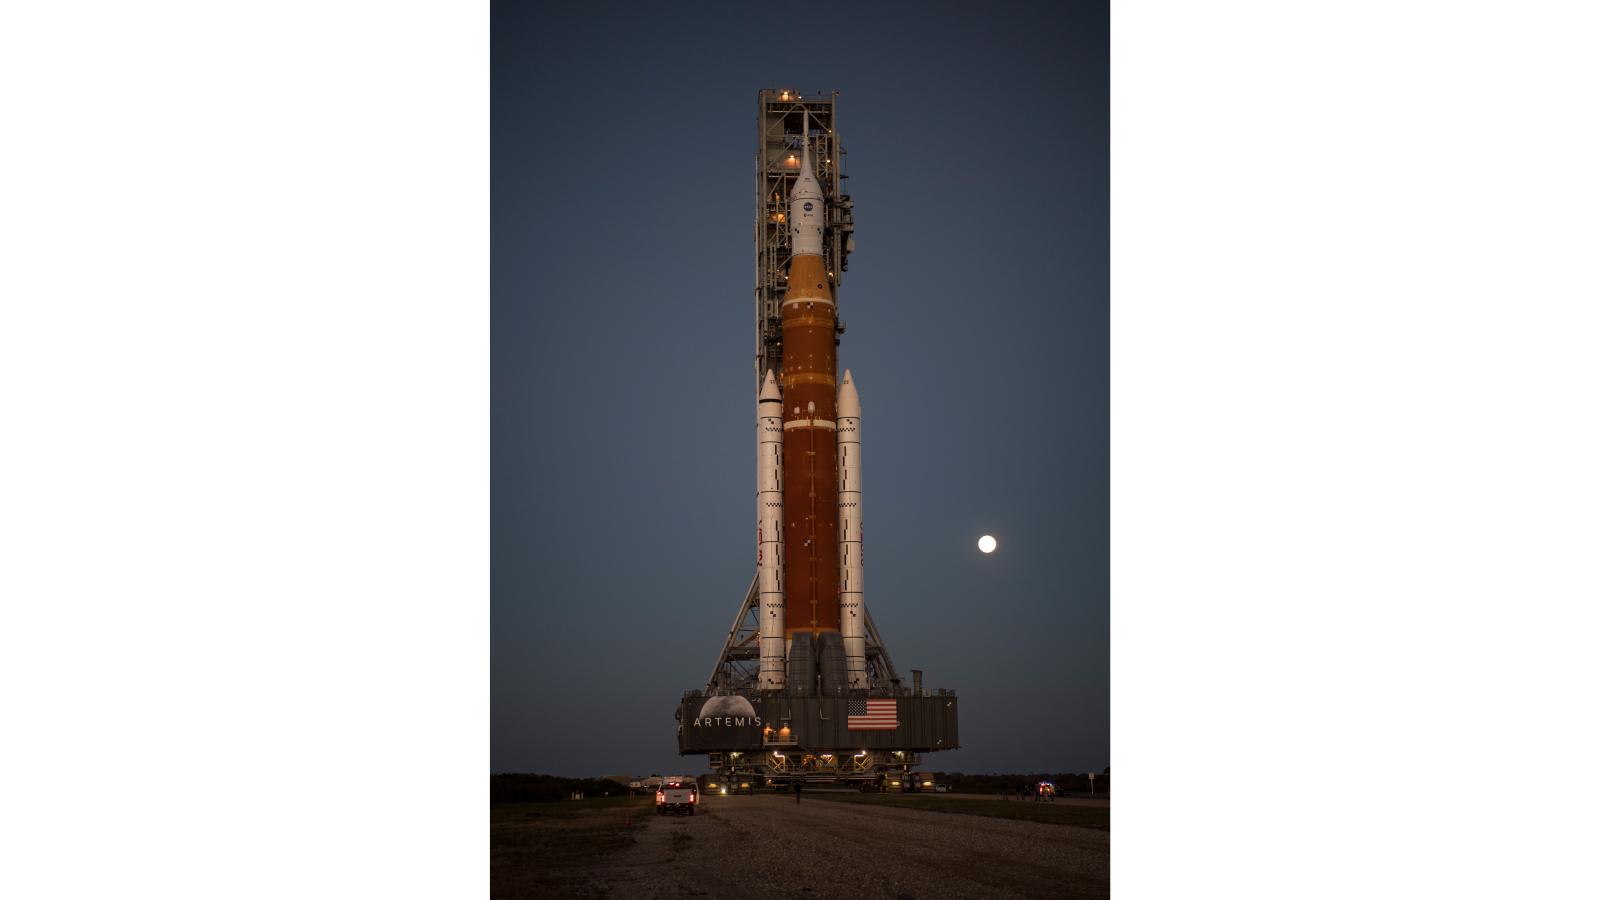 The Artemis 1 rocket is backdropped by the moon during rollout to the pad on March 17, 2022.